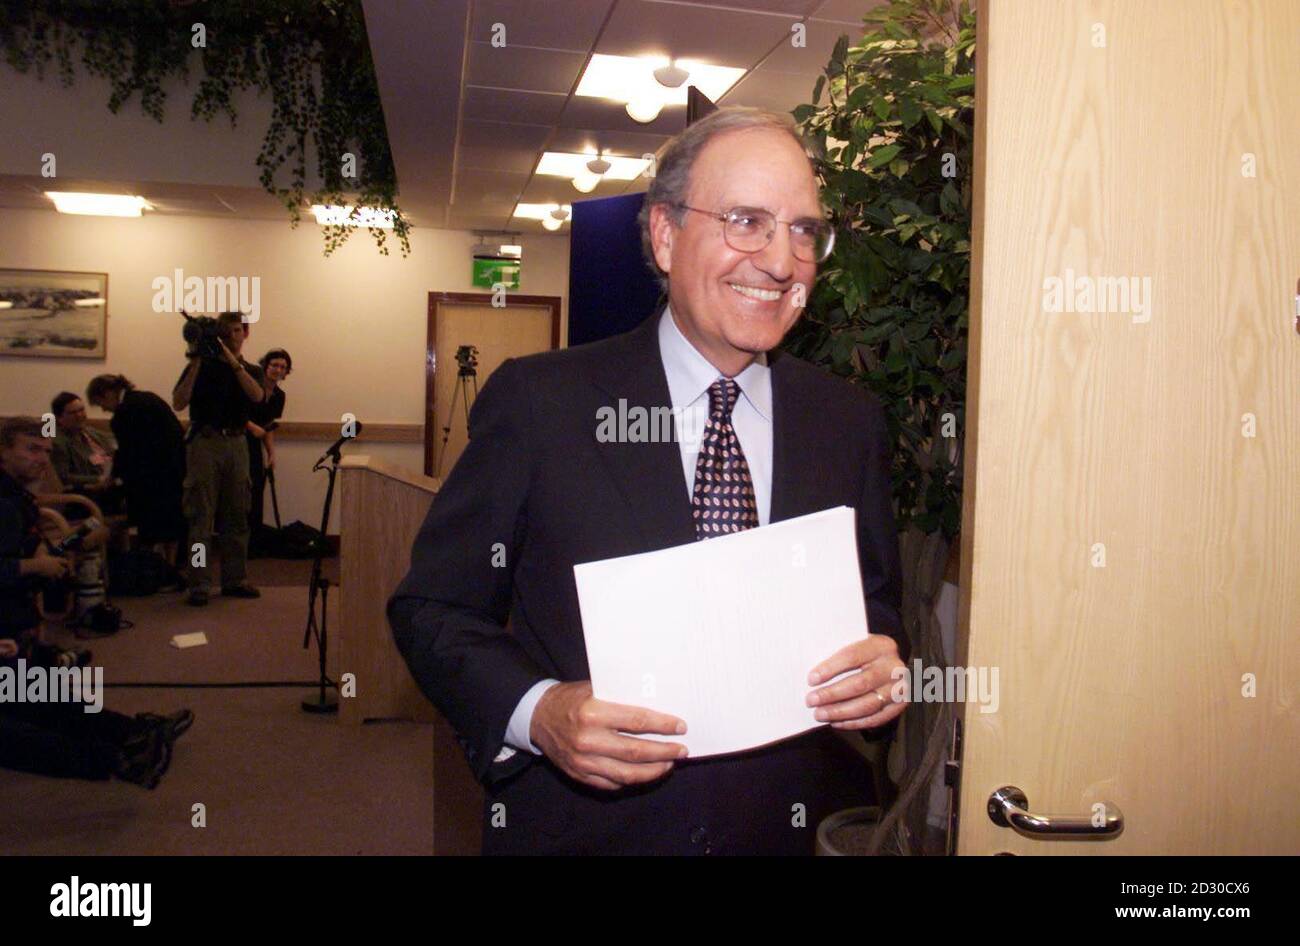 Former Senator George Mitchell leaves a press conference in Belfast to start meeting the various political parties in Northern Ireland. The aim of the meetings is to try to resolve the decommissioning row and the formation of a Northern Ireland Executive. Stock Photo